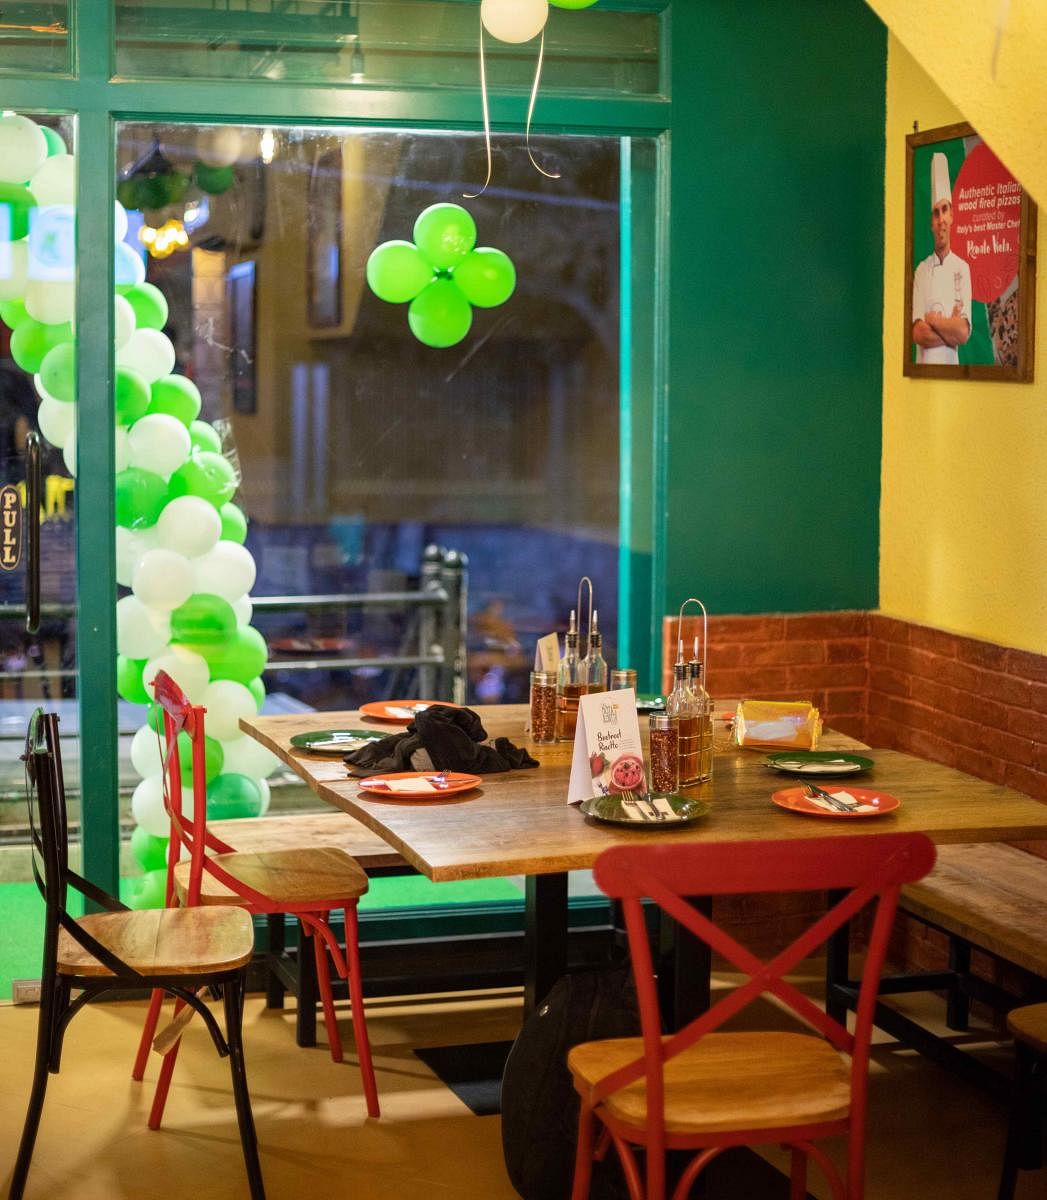 The place, in Koramangala, has colourful interiors and an Italian vibe.